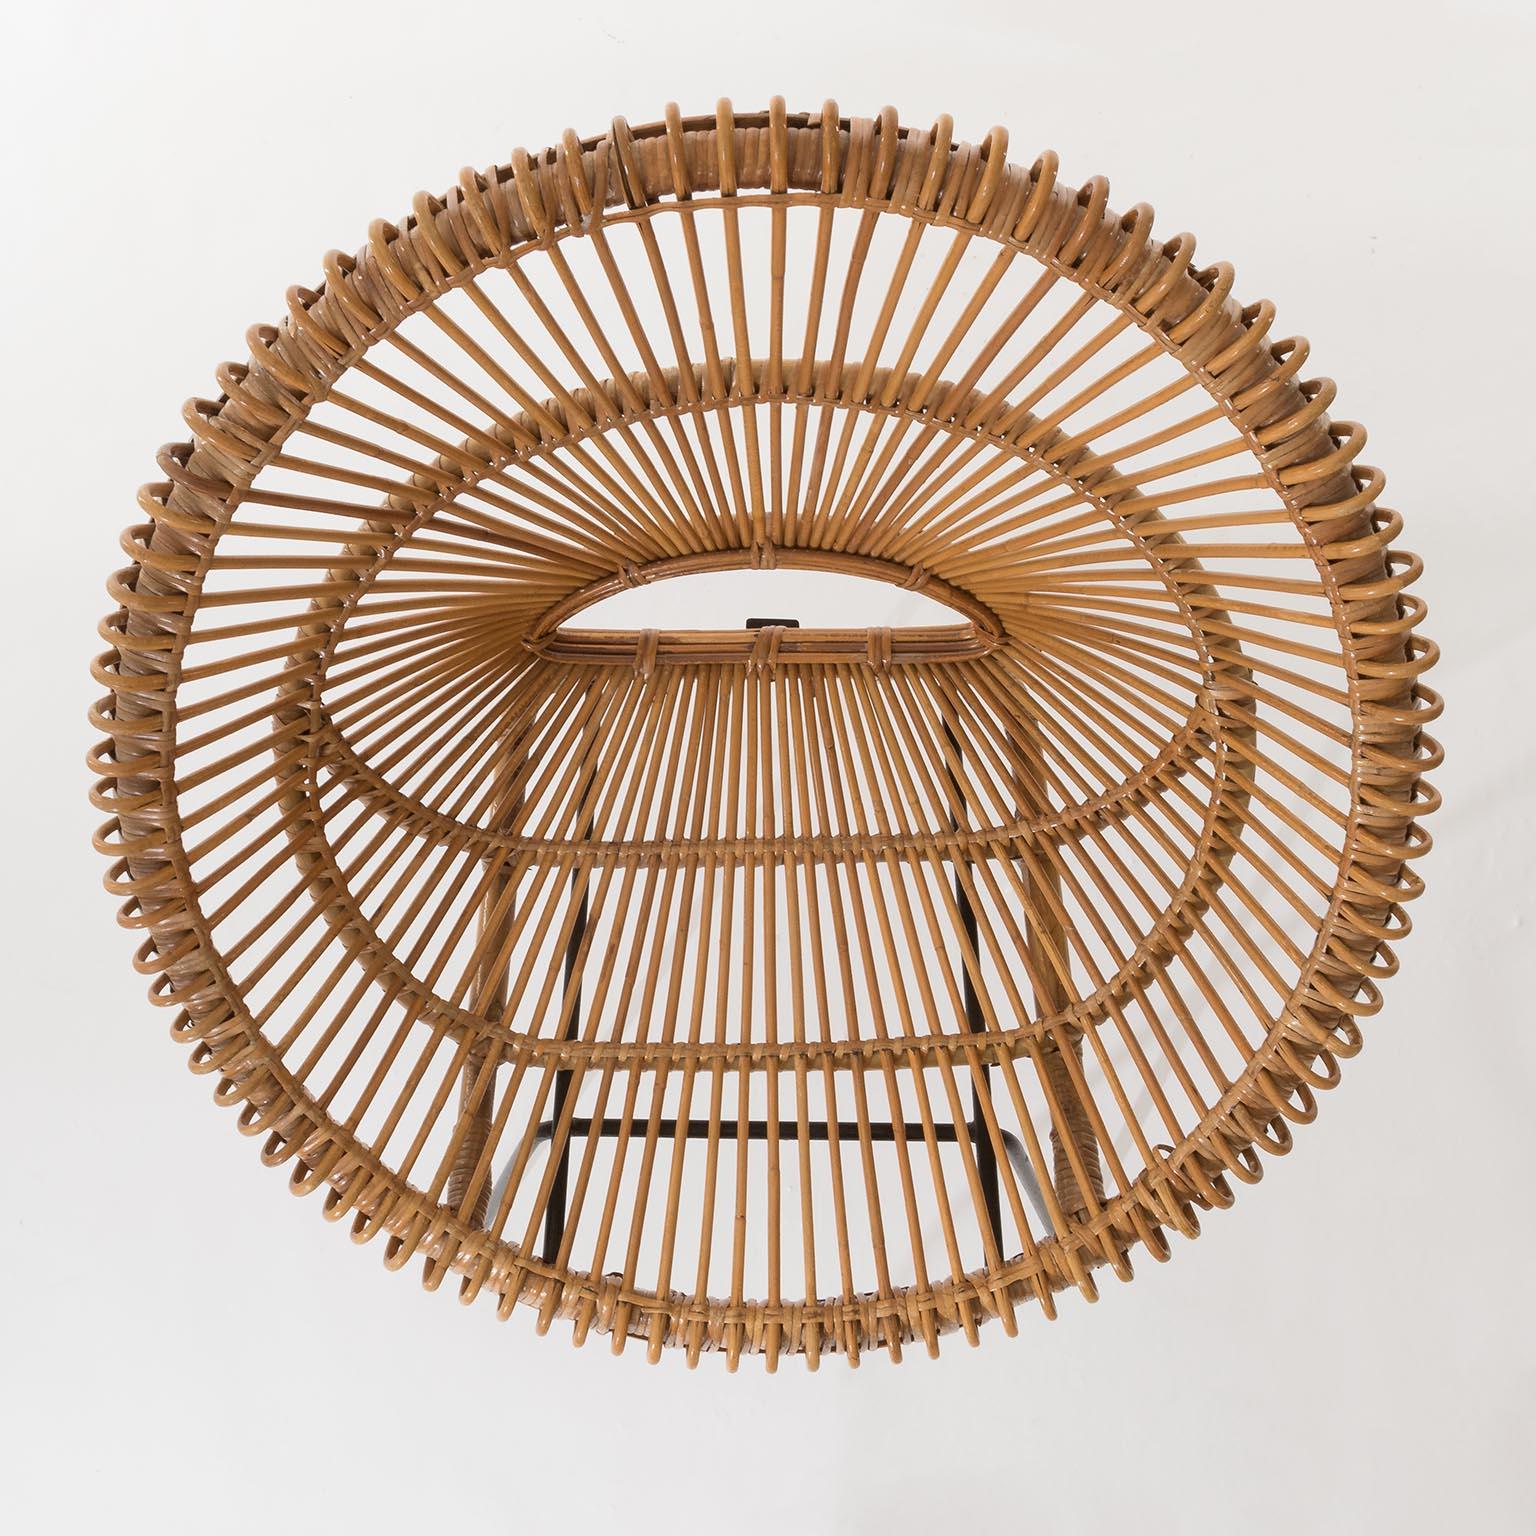 Pair of Mid-Century Modern Rattan Bamboo Chairs, Janine Abraham, Dirk Rol, 1960s For Sale 6